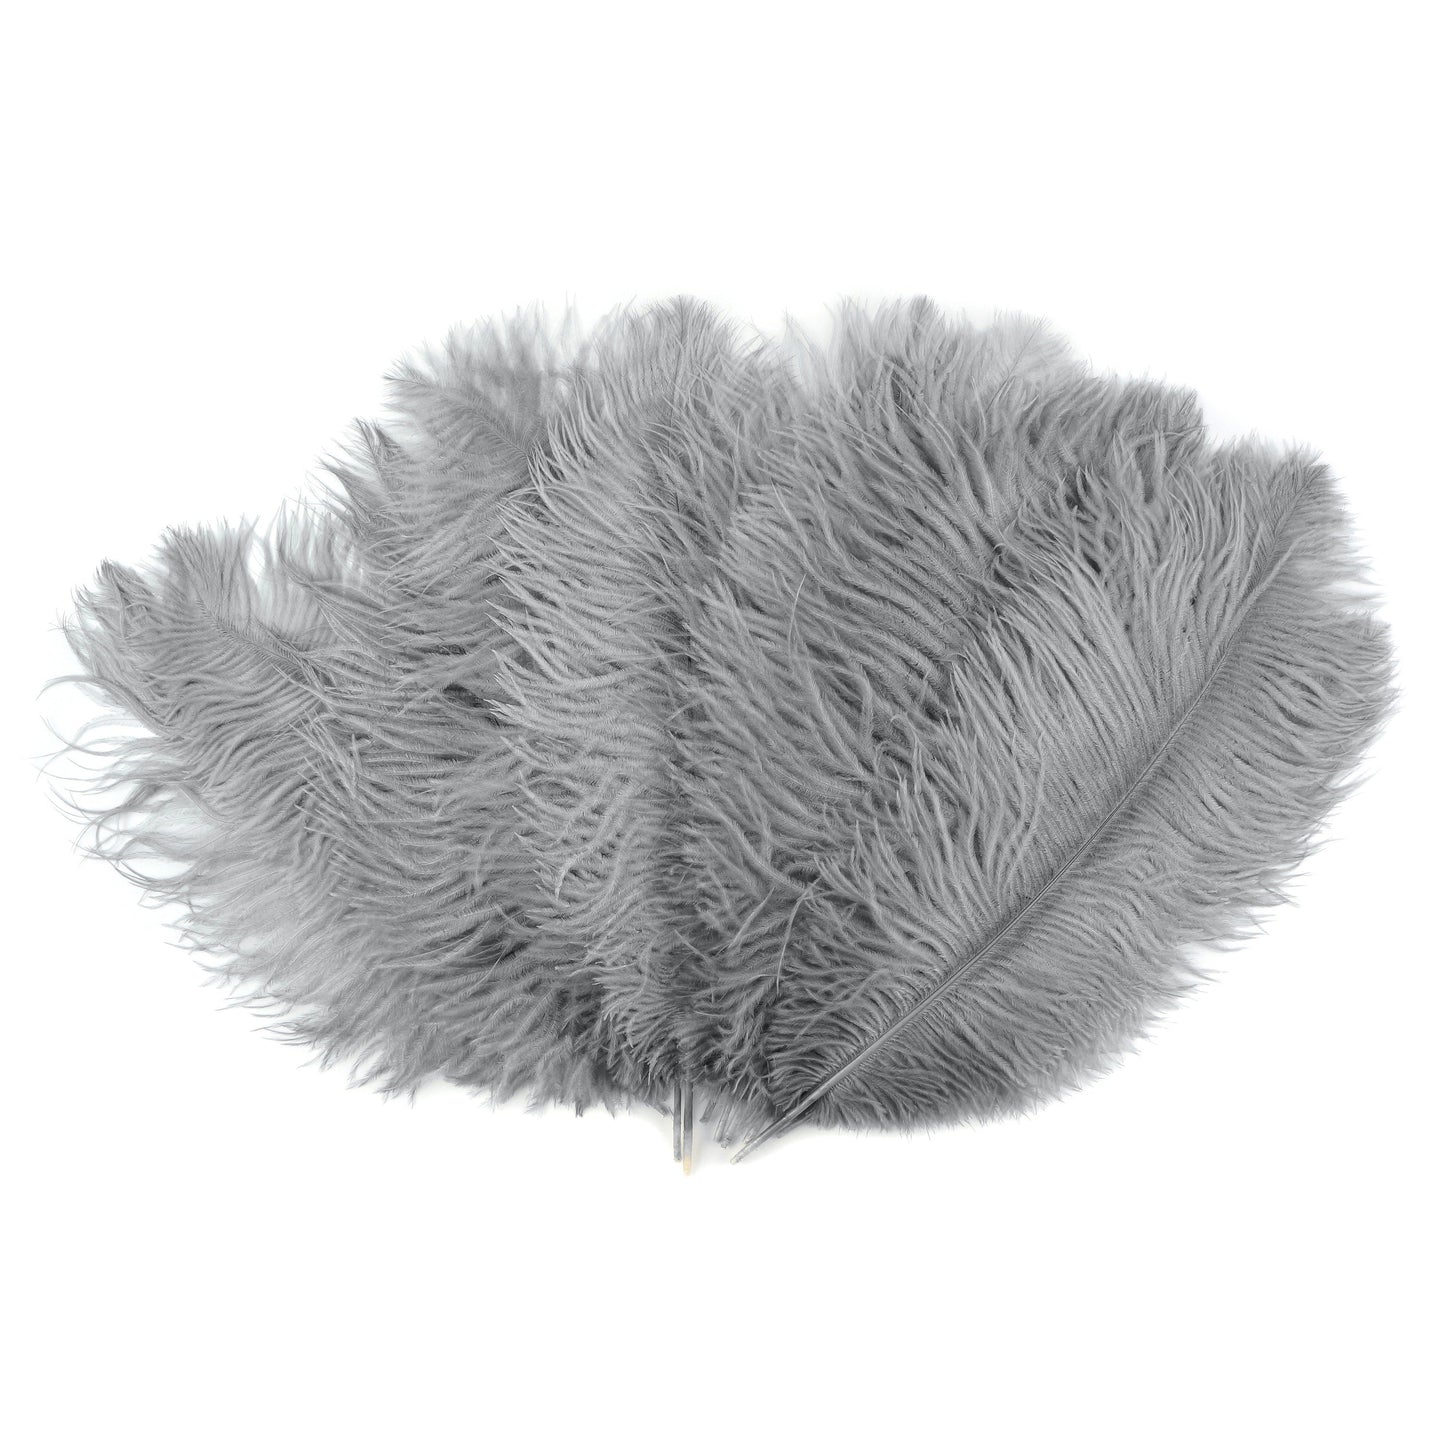 Ostrich Feathers 13-16" Drabs - Silver